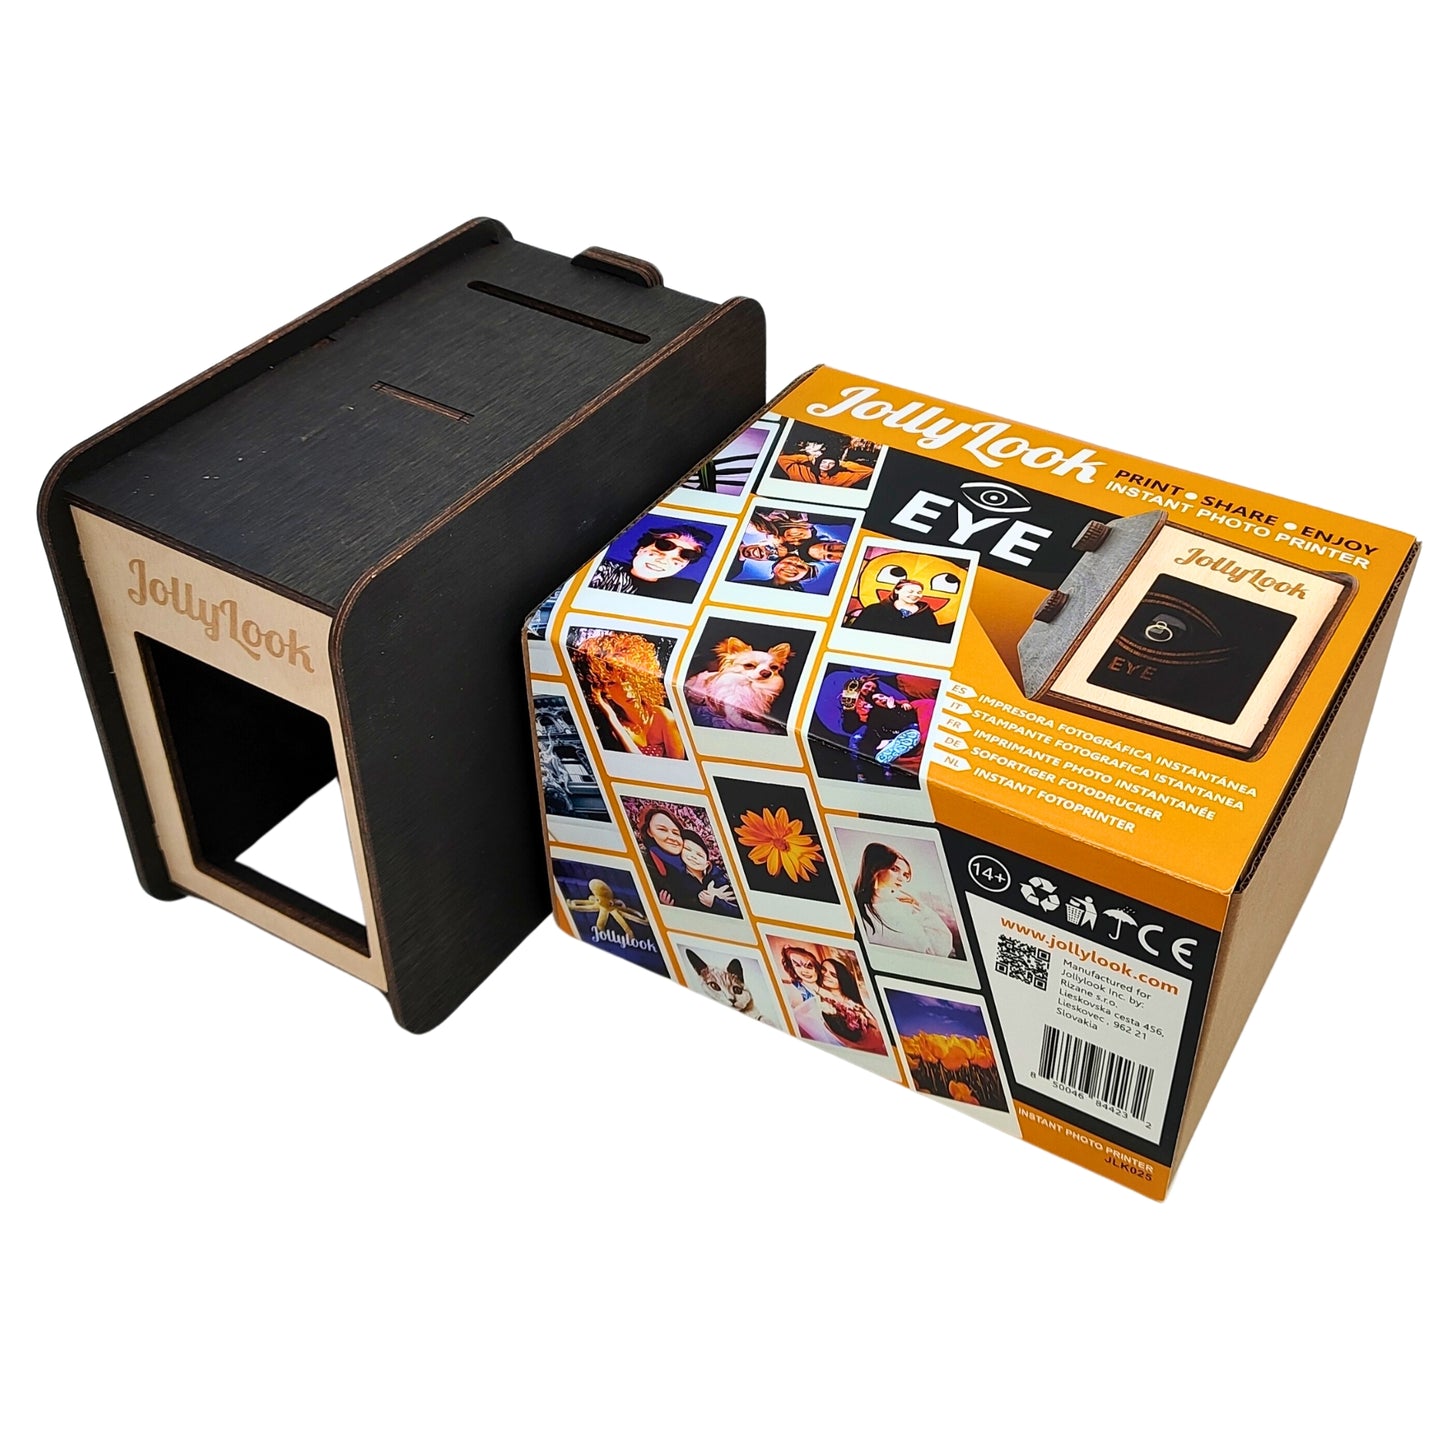 Jollylook EYE Instant Printer on white background compatible with Fujifilm Instax Mini Film with the packing